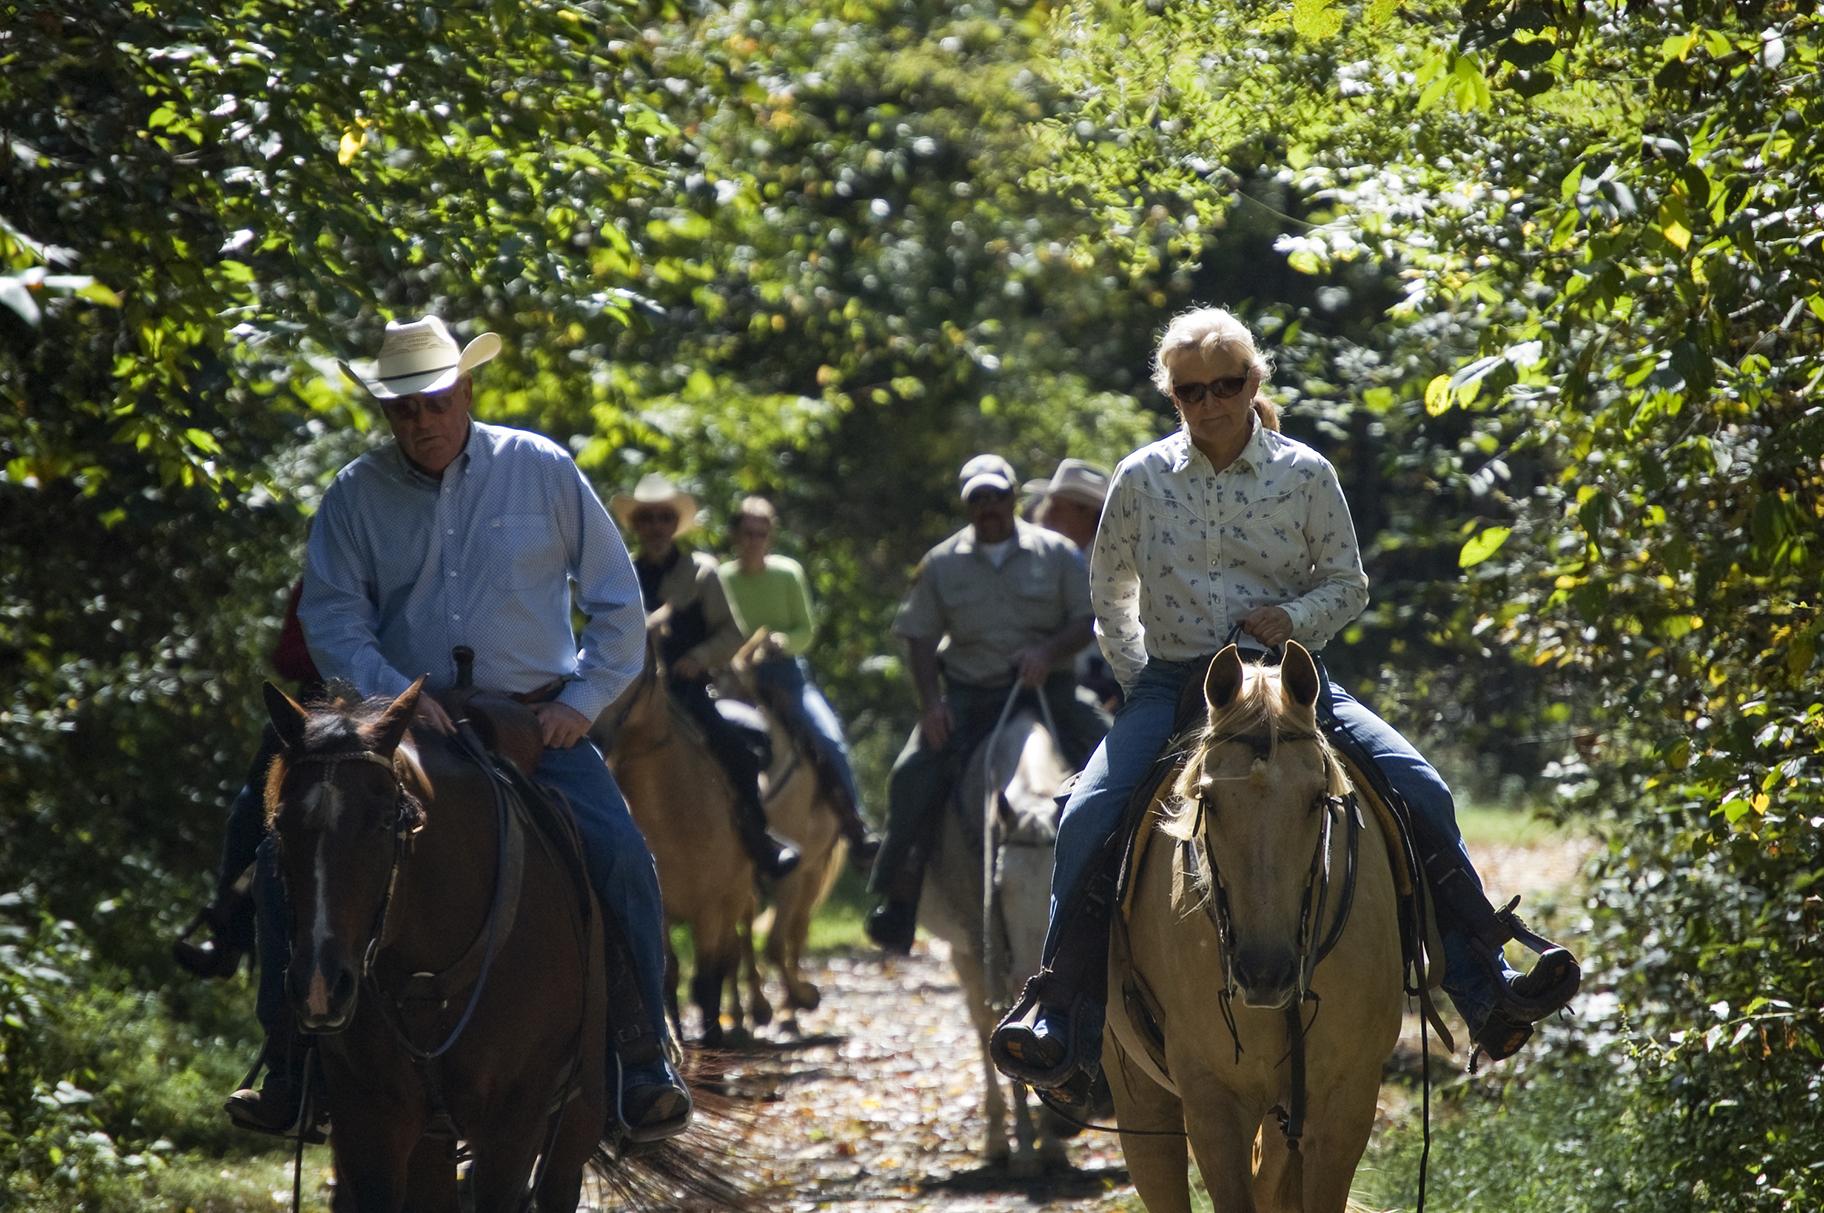 Horseback riding at New River Trail State Park in Virginia (Virginia State Parks / Wikimedia Commons)